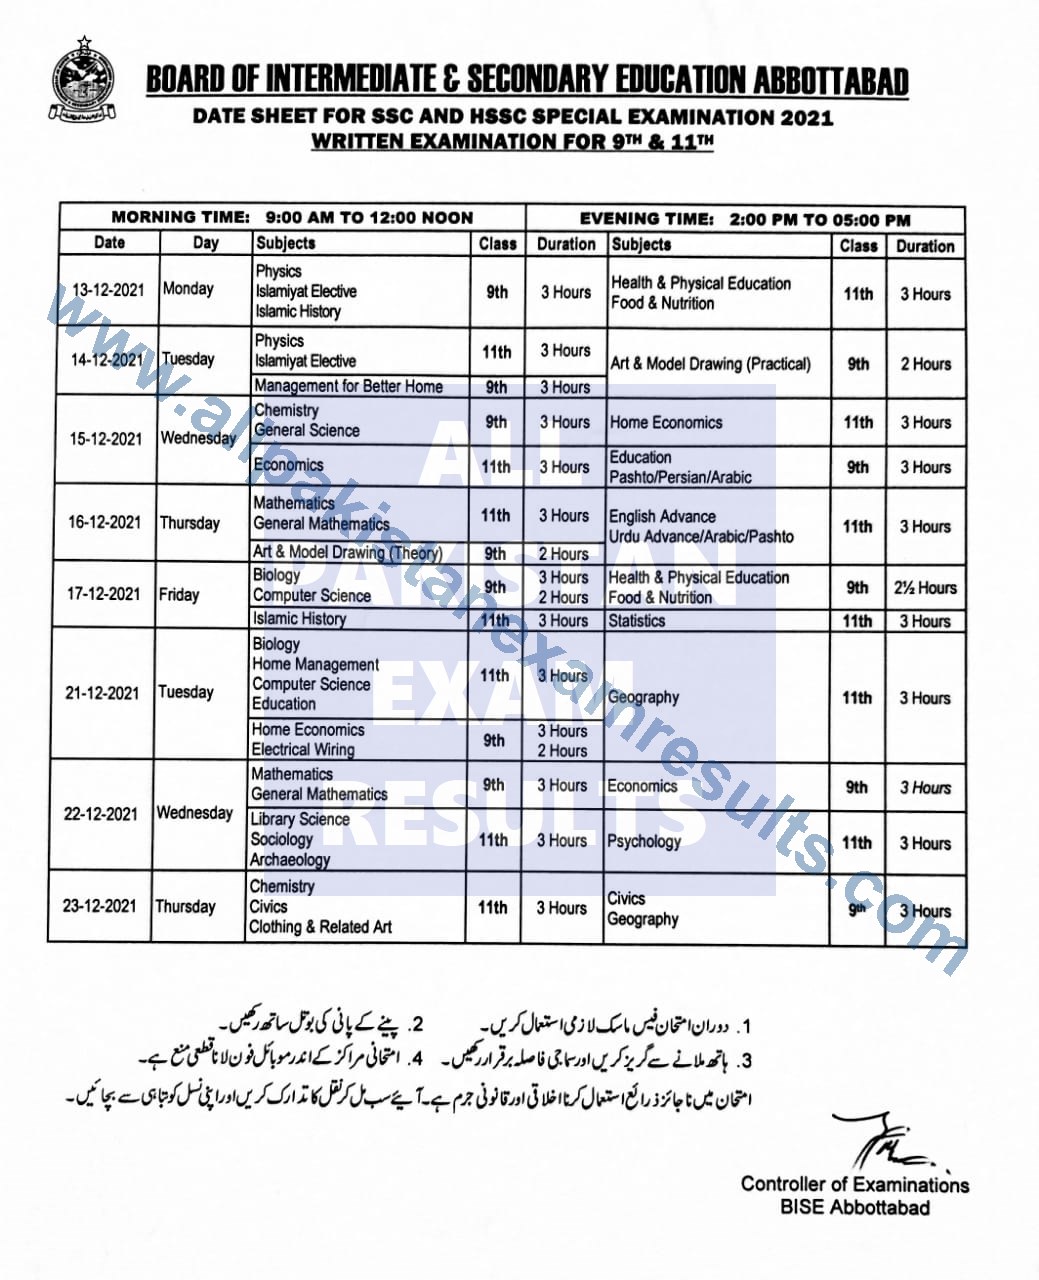 BISE abbotabad Date Sheet For SSC & HSSC Part 1 Special Exam 2021